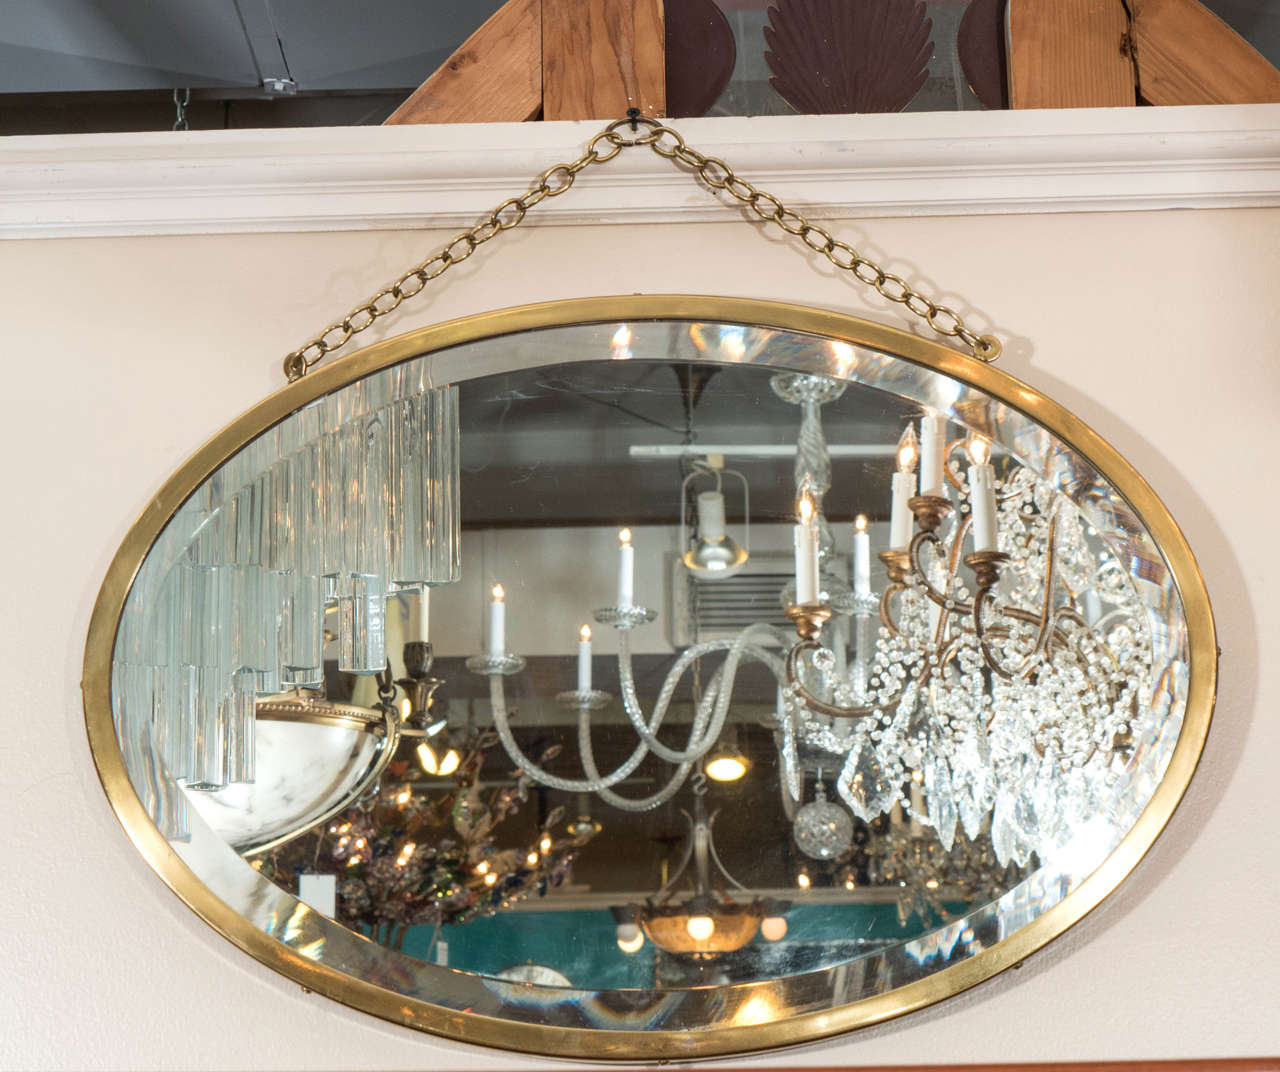 A vintage 1950s oval brass framed beveled mirror made by Brasscrafters (embossed on back) with brass chain detail.